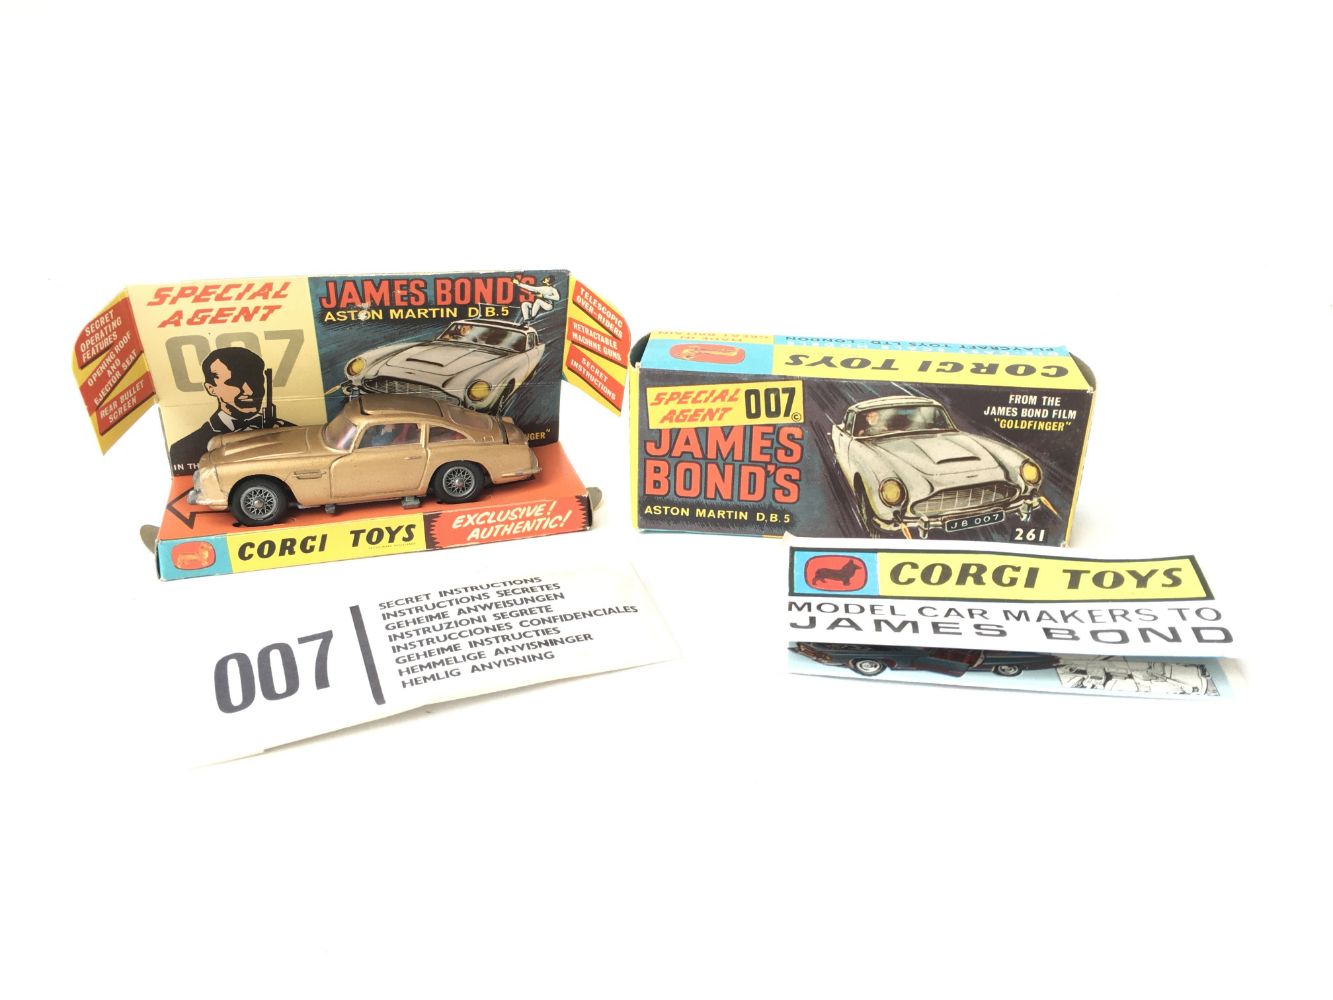 Specialist Toy & Model Auction - commencing at 9am